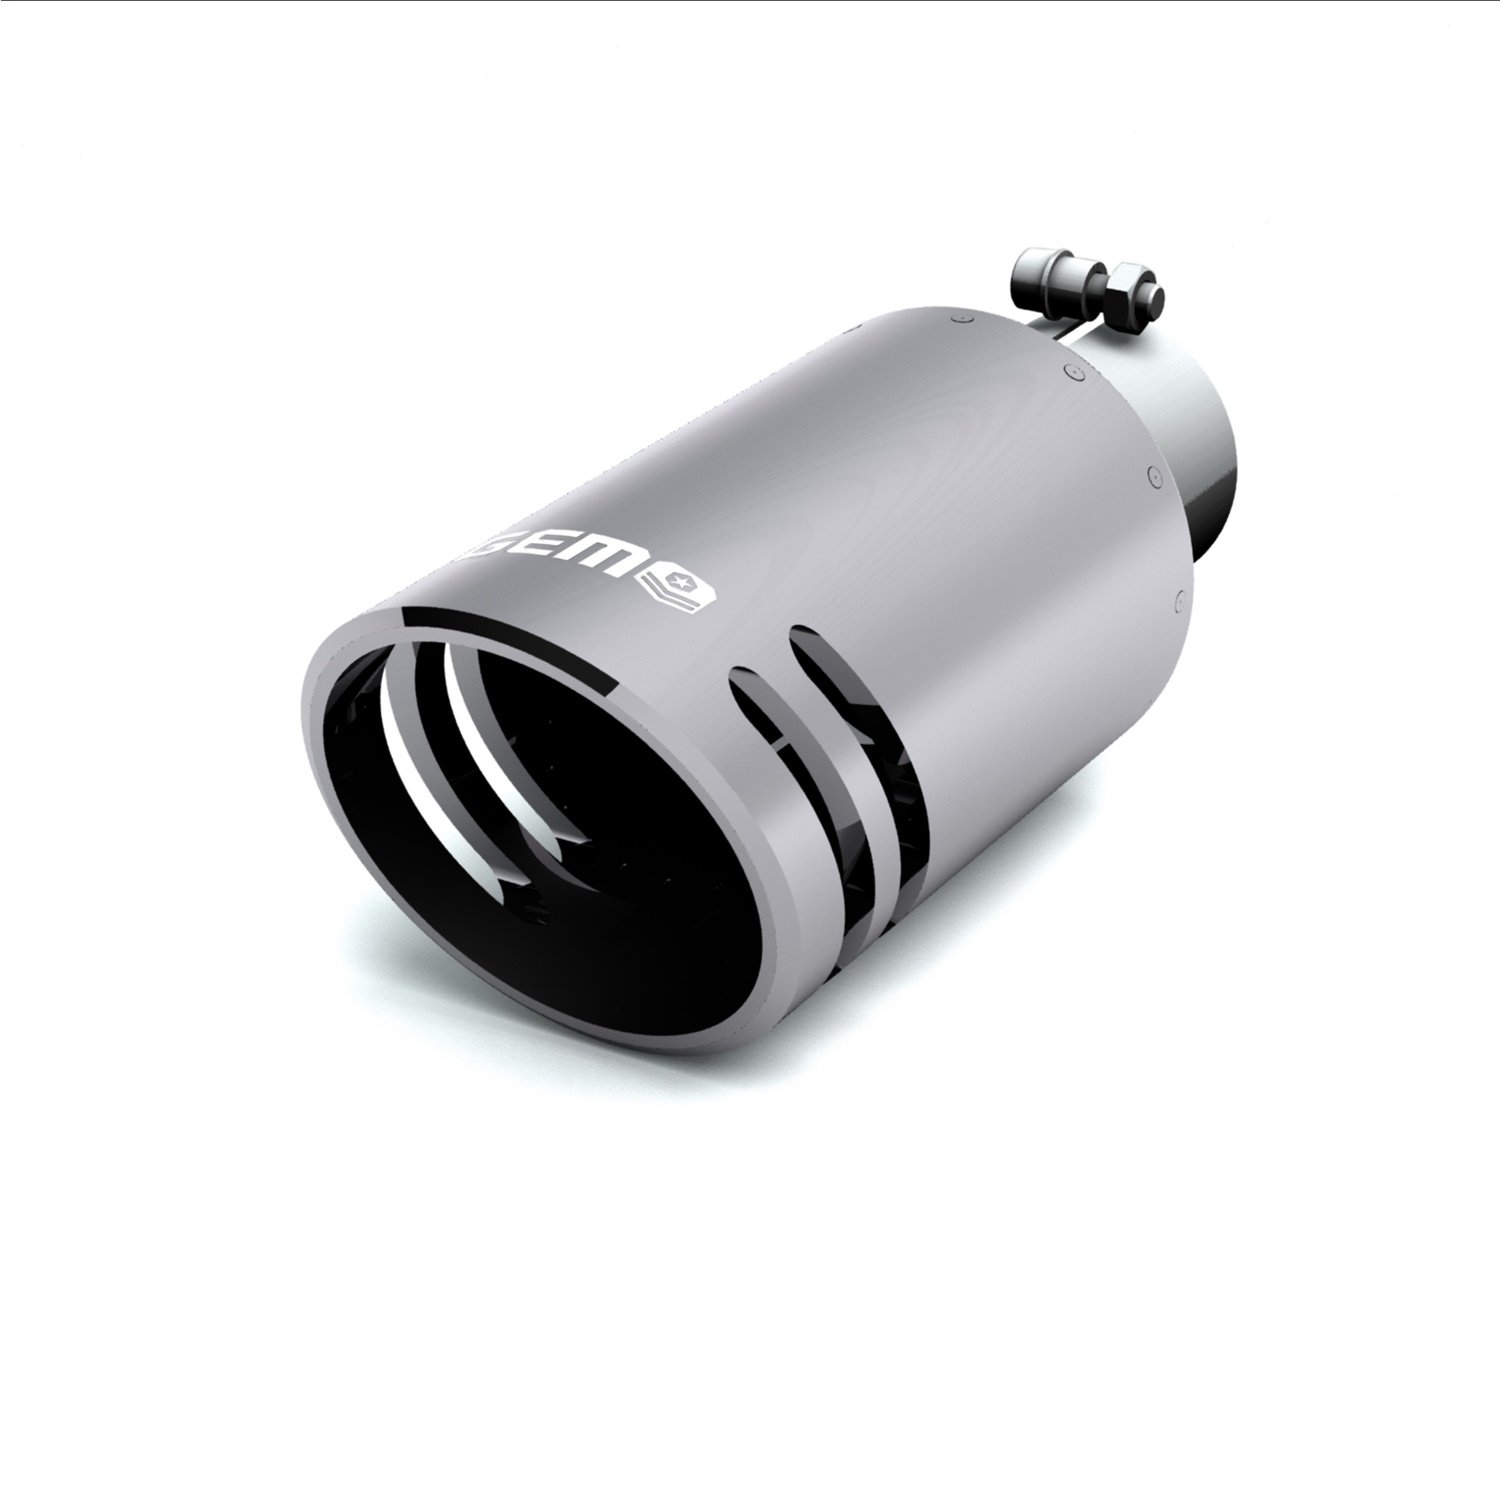 GEM Billet Exhaust Tip, 3 in. Inlet/5 in. Outlet x 12 in. Length, Aluminum/304 Stainless Steel, SILENCER Cut [Chrome Finish]